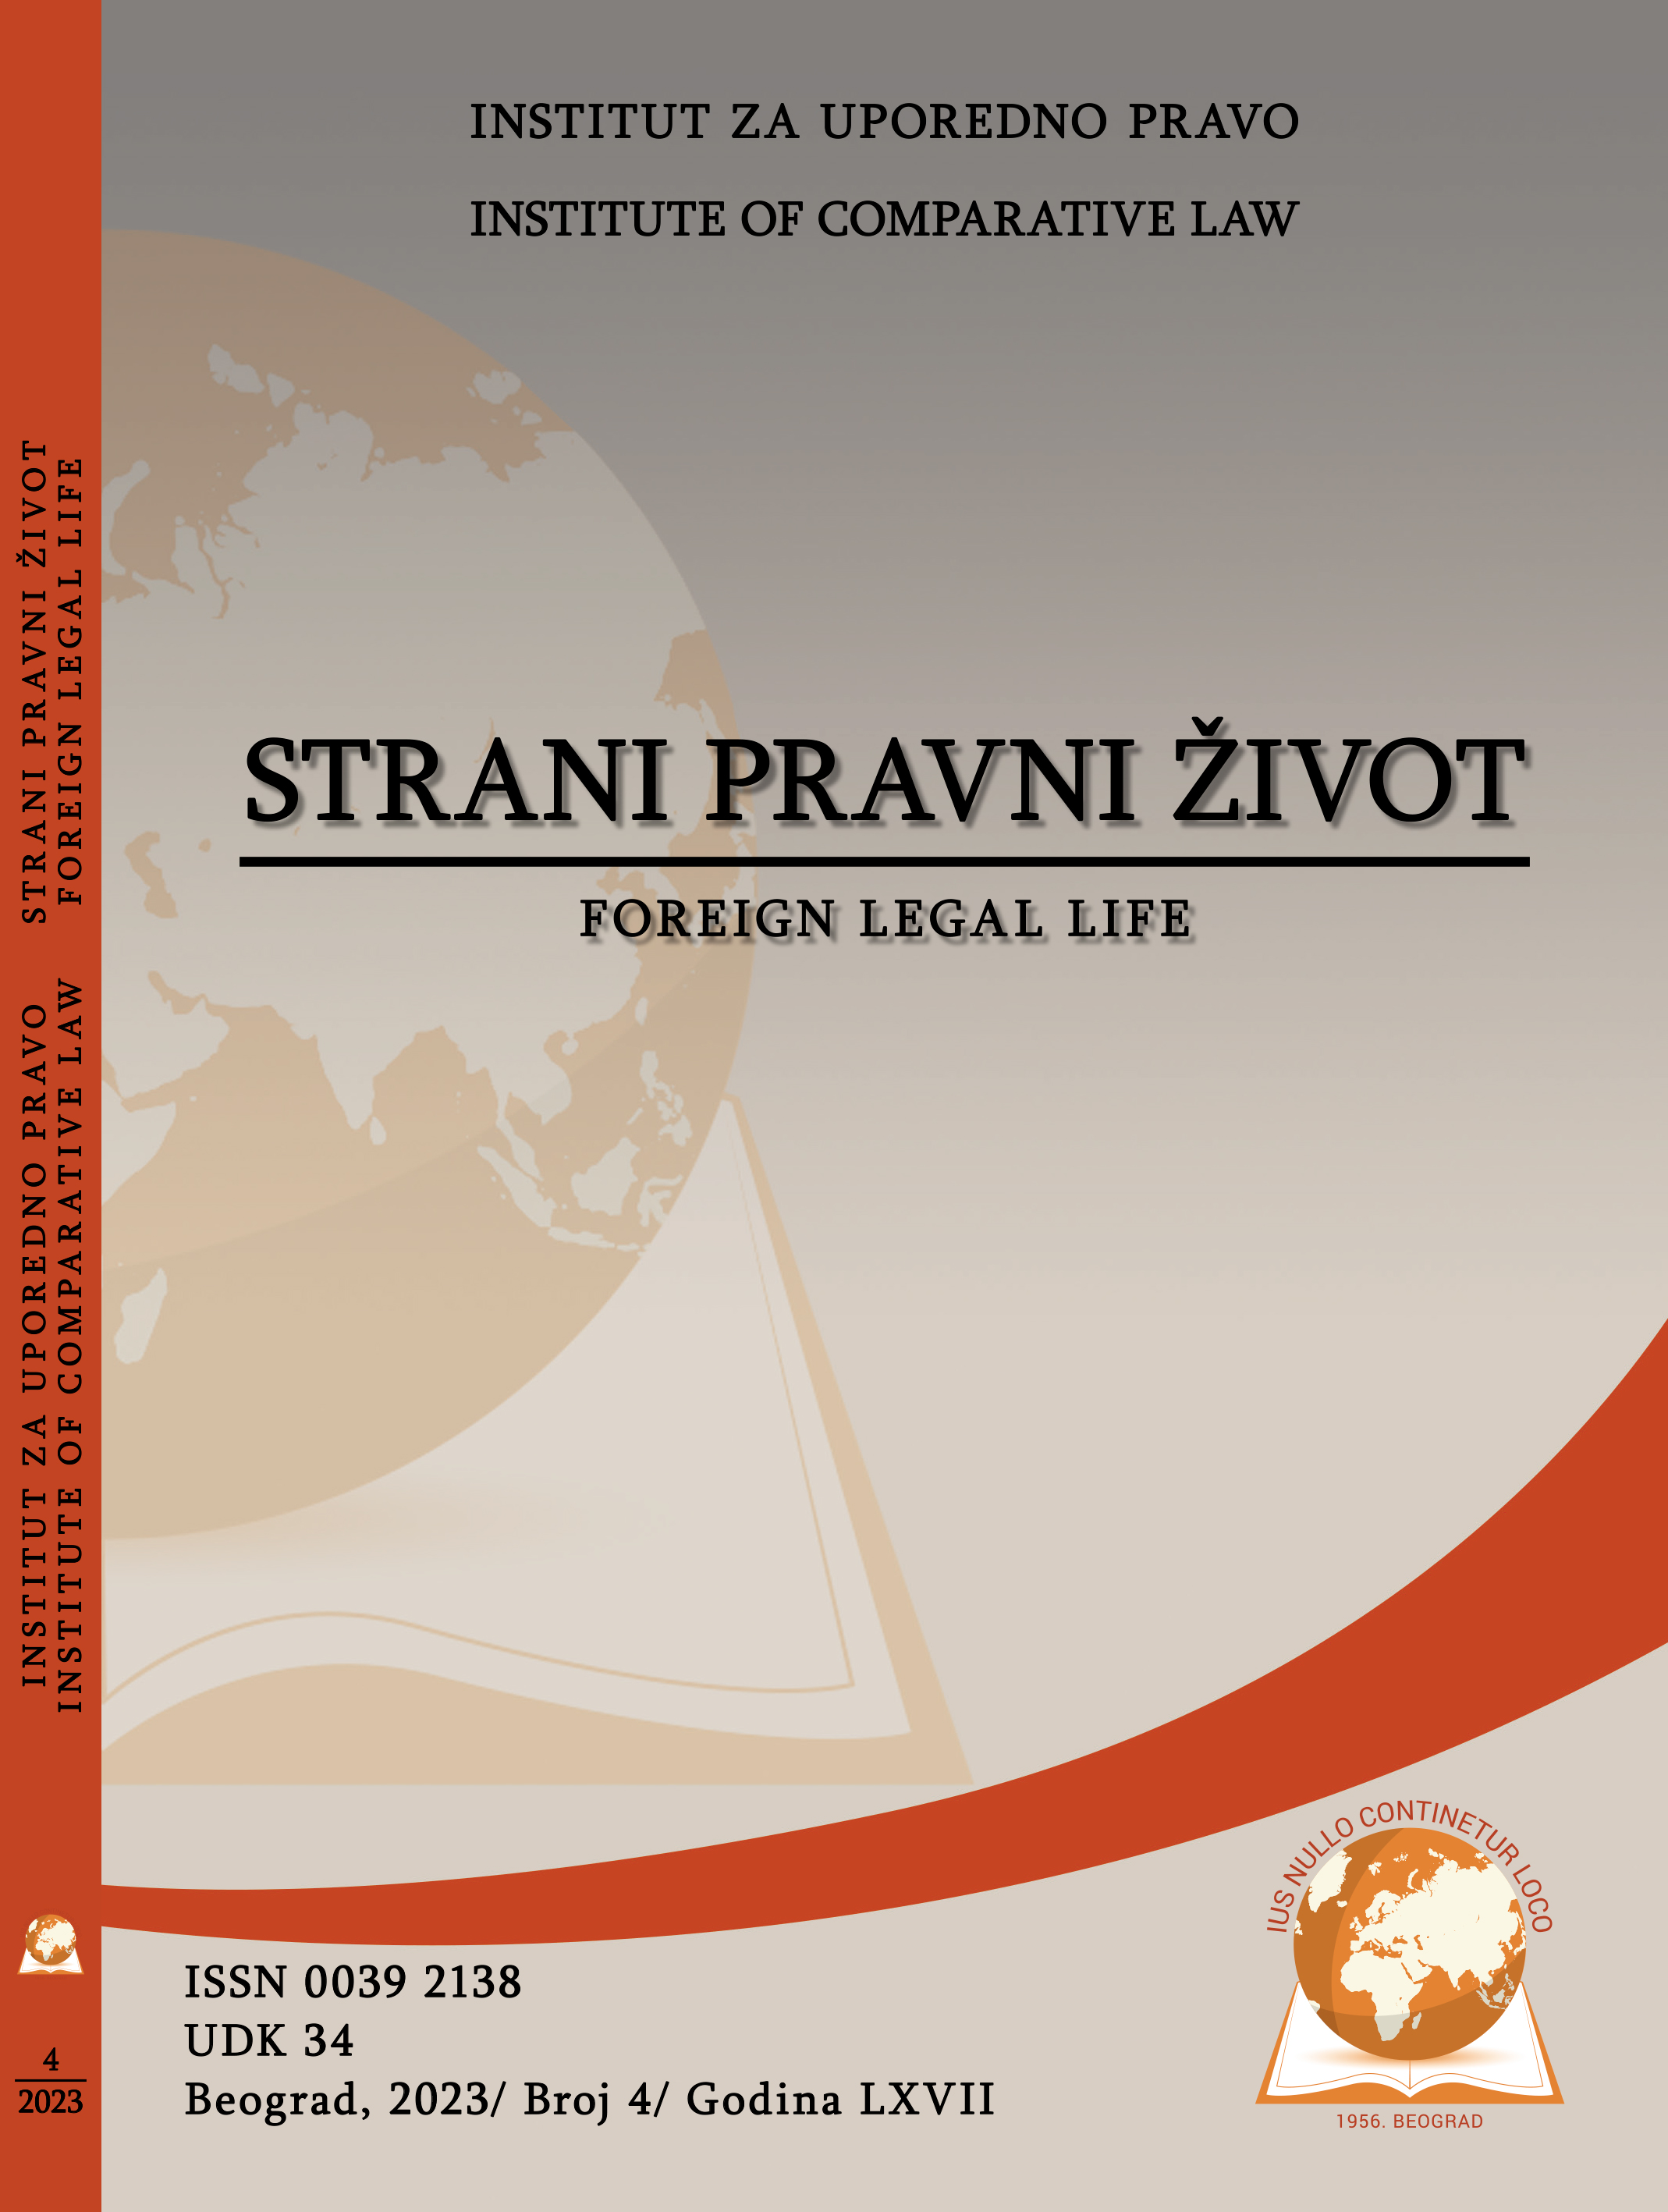 REVISION (SECOND APPEAL ON THE POINTS OF LAW) IN SERBIAN LITIGATION PROCEEDINGS